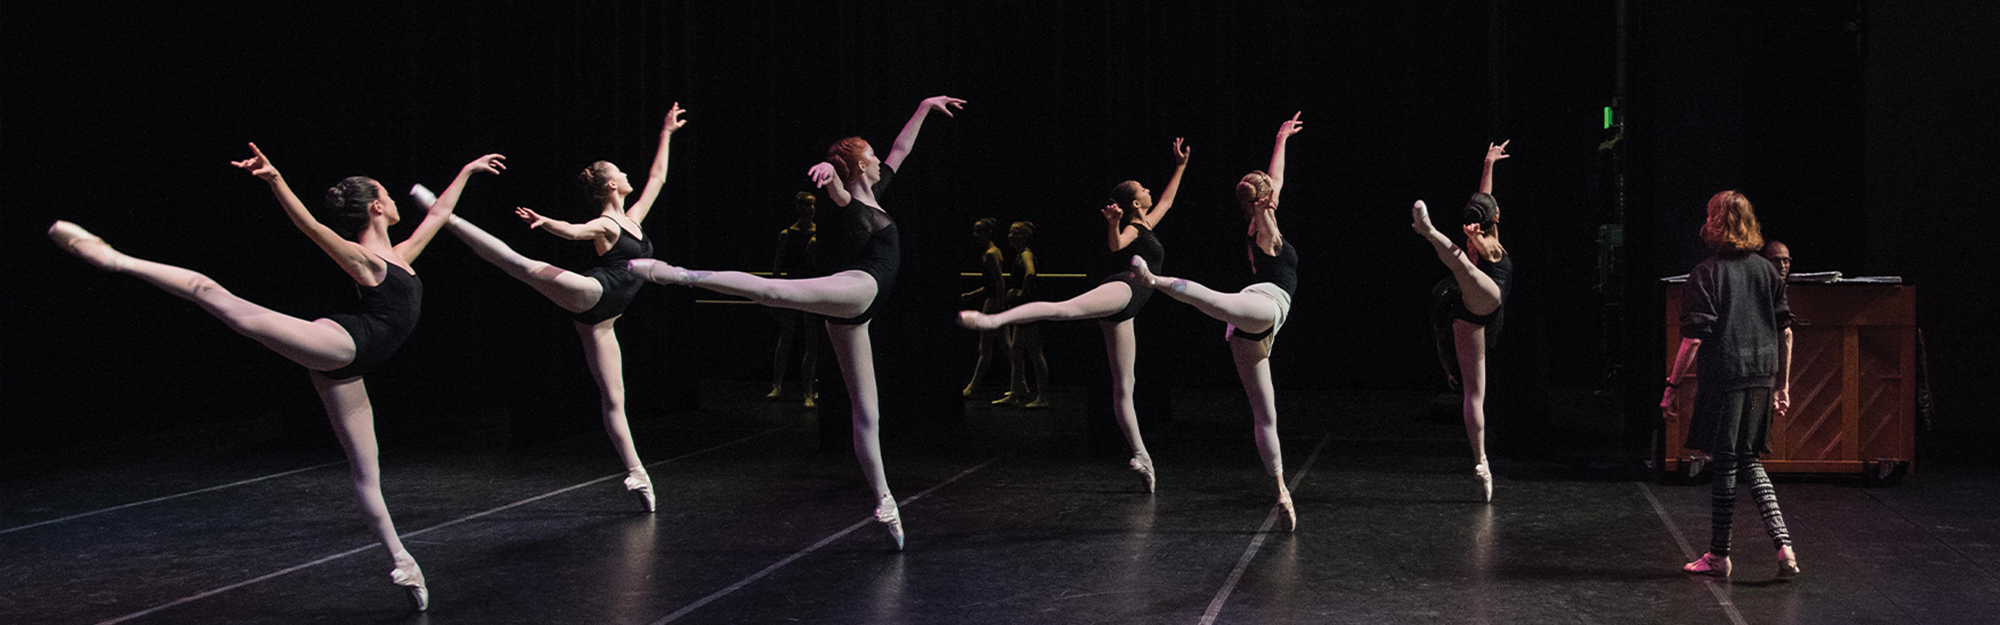 A captivating performance by a group of ballet dancers gracefully moving on stage.